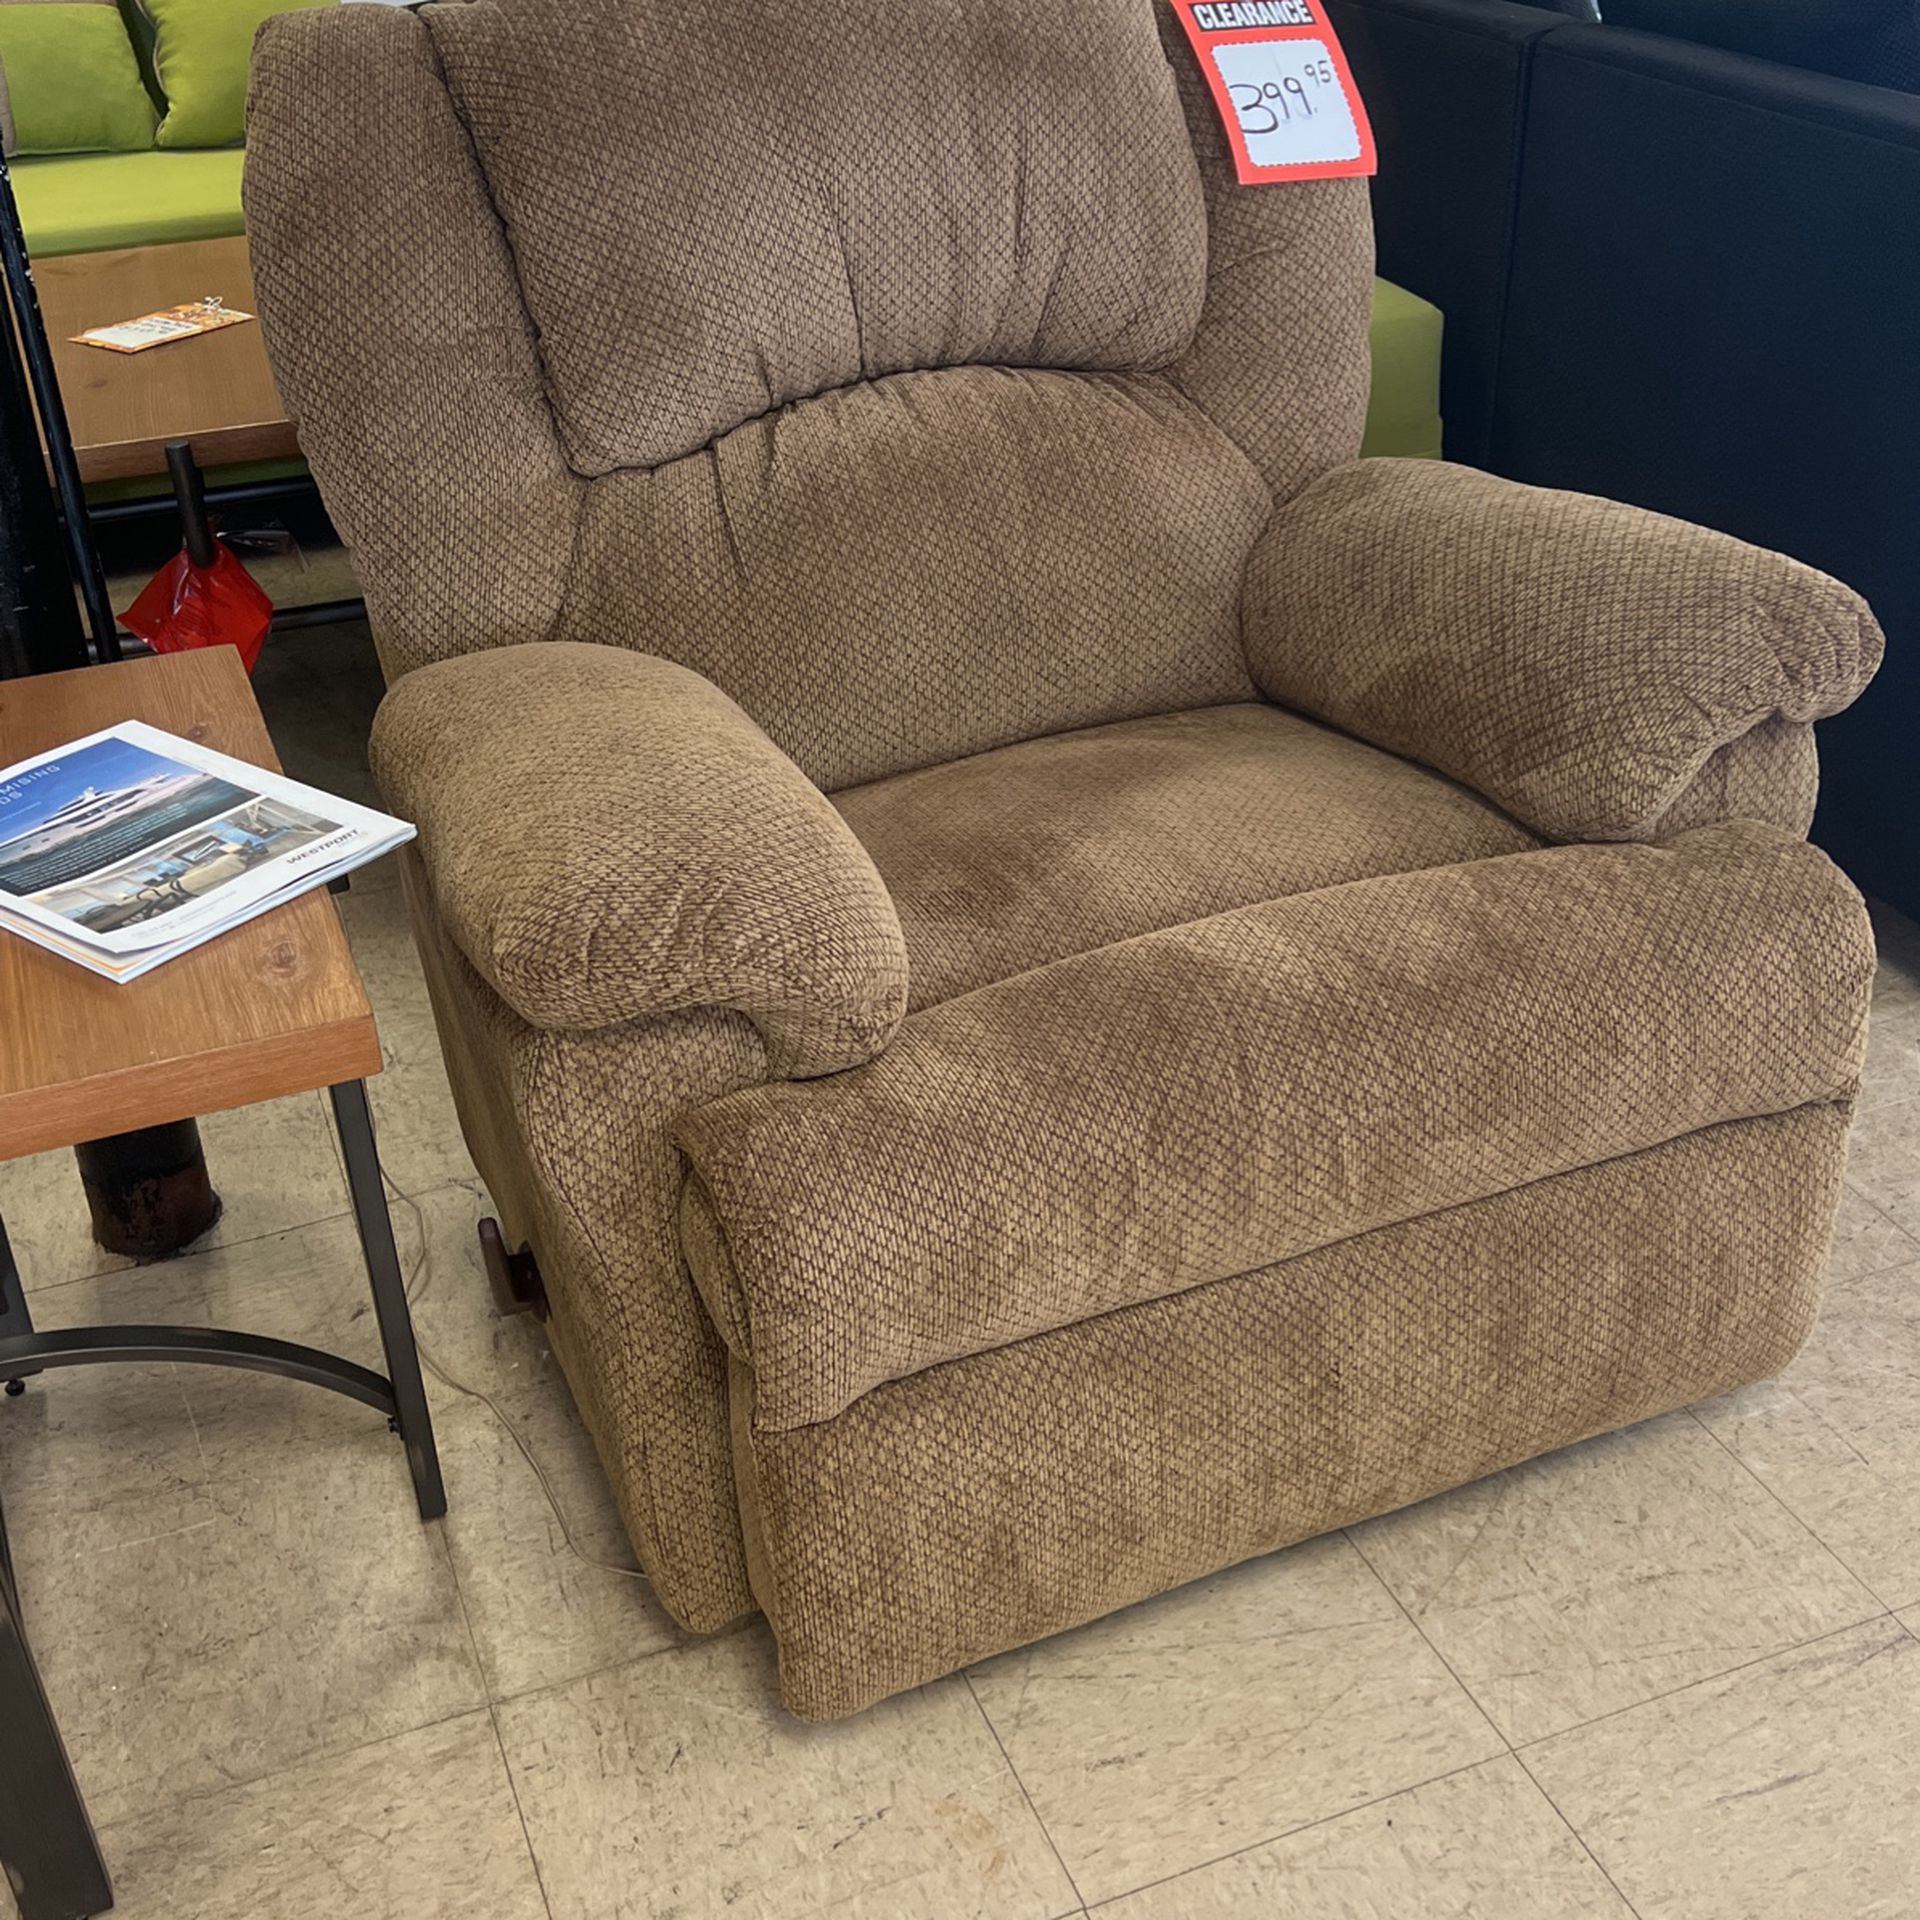 Brand new recliner for only 399